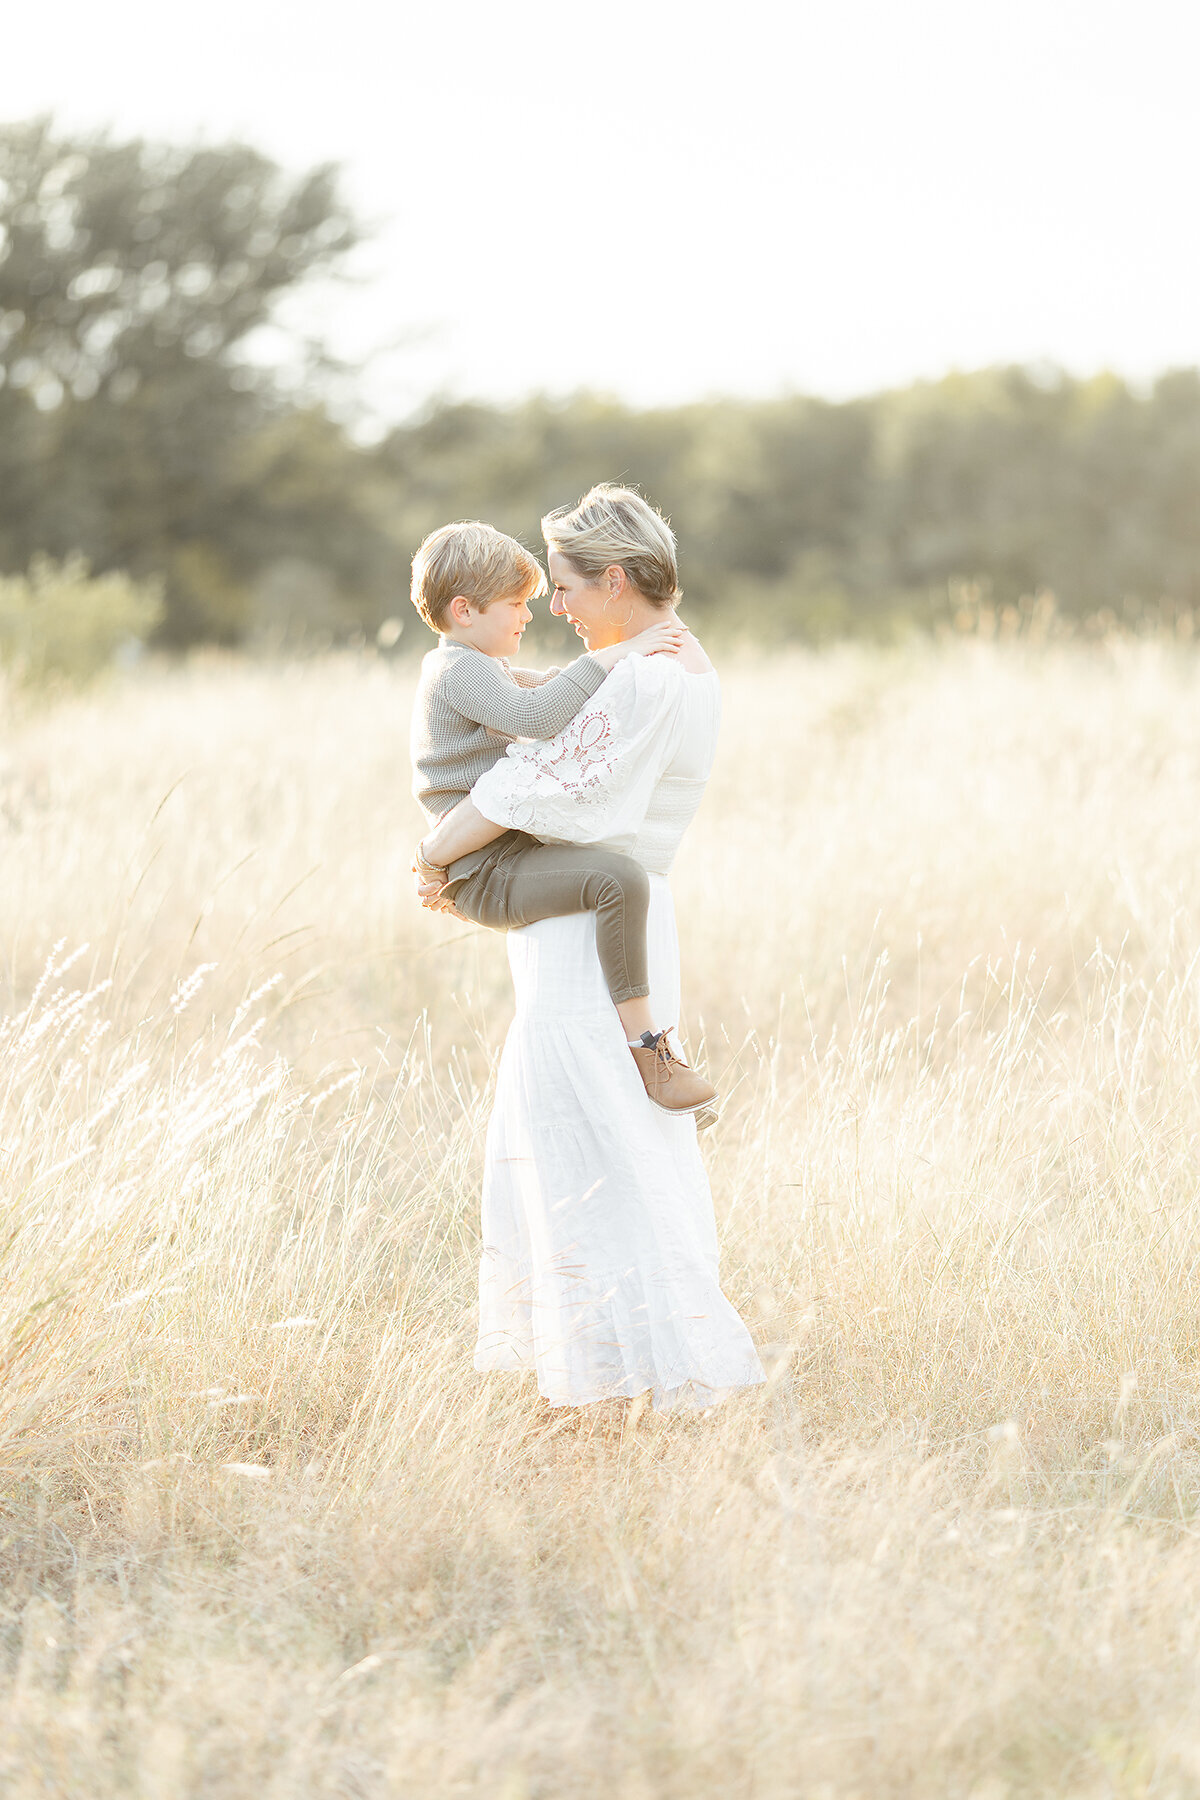 A photo of a mother carrying her son in a grassy field for their family photos.